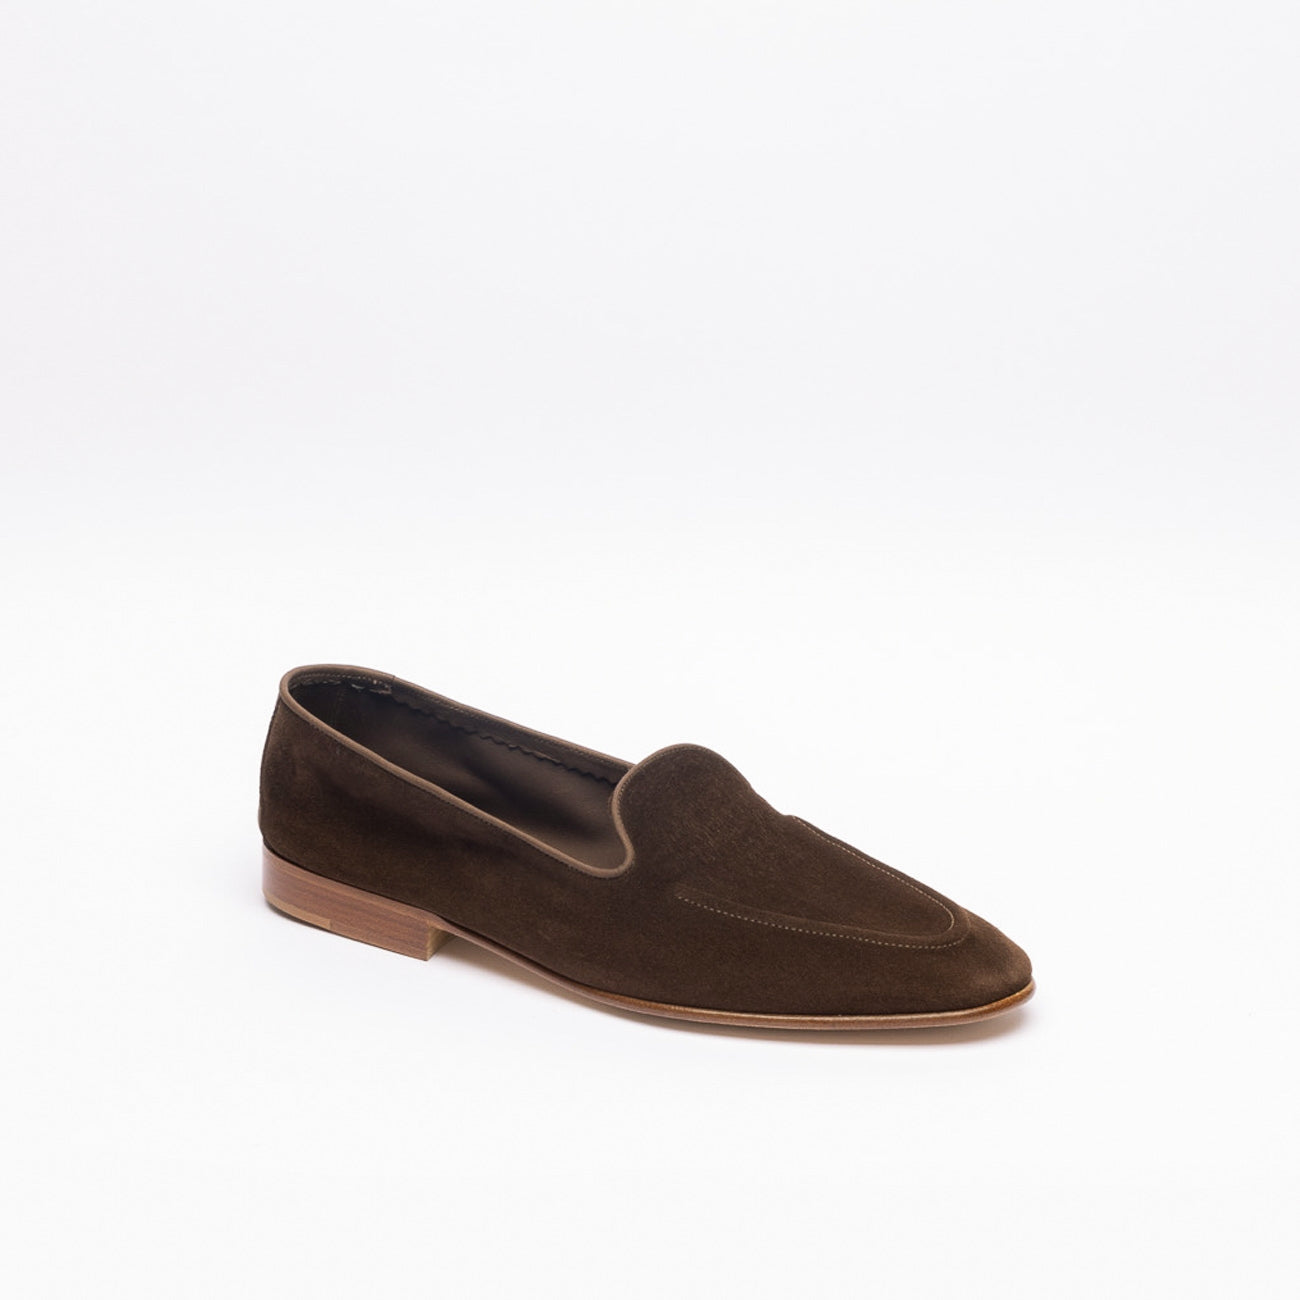 Edward Green pepper baby calf suede loafer